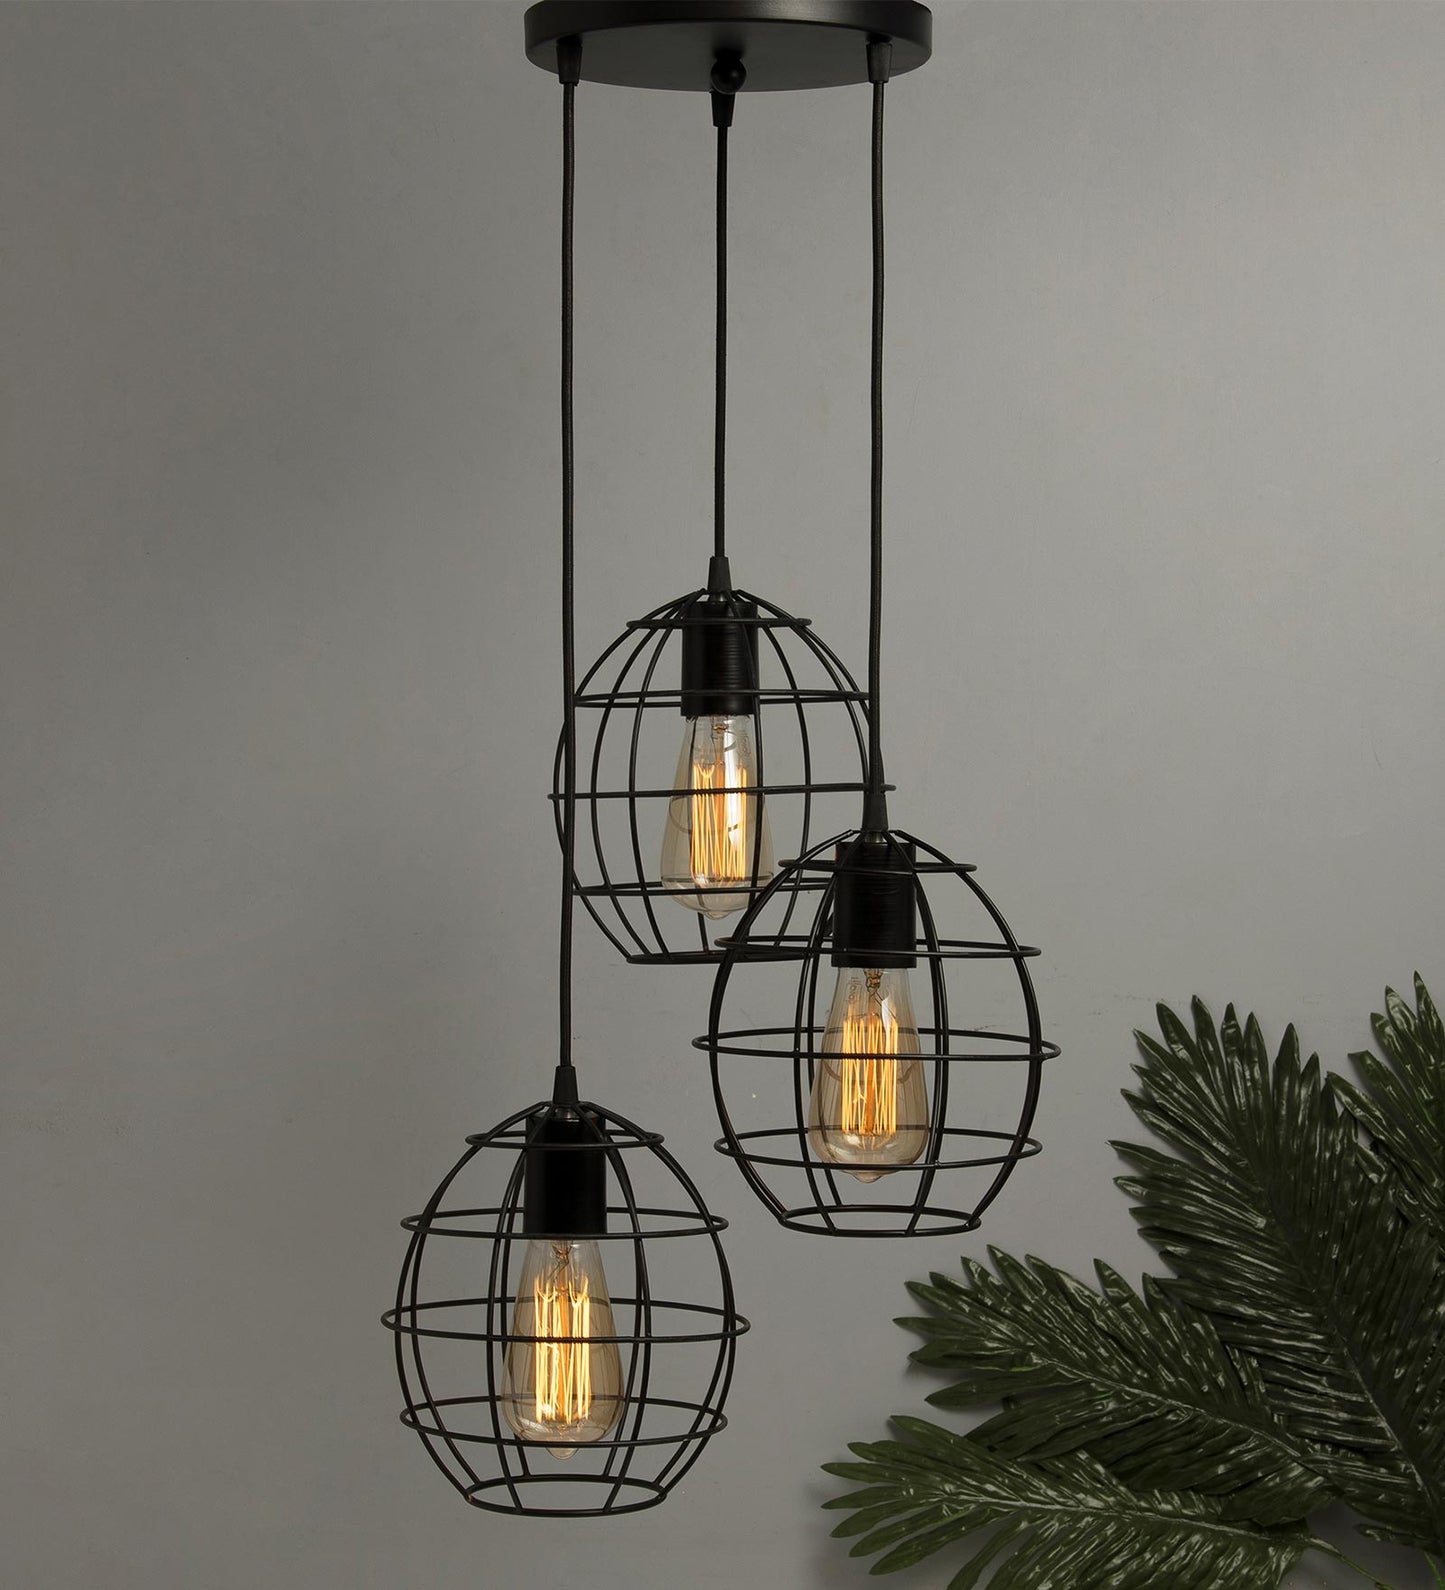 3-lights Round Cluster Chandelier Metal Hanging Pendant Light with Braided Cord, Industrial Retro modern light